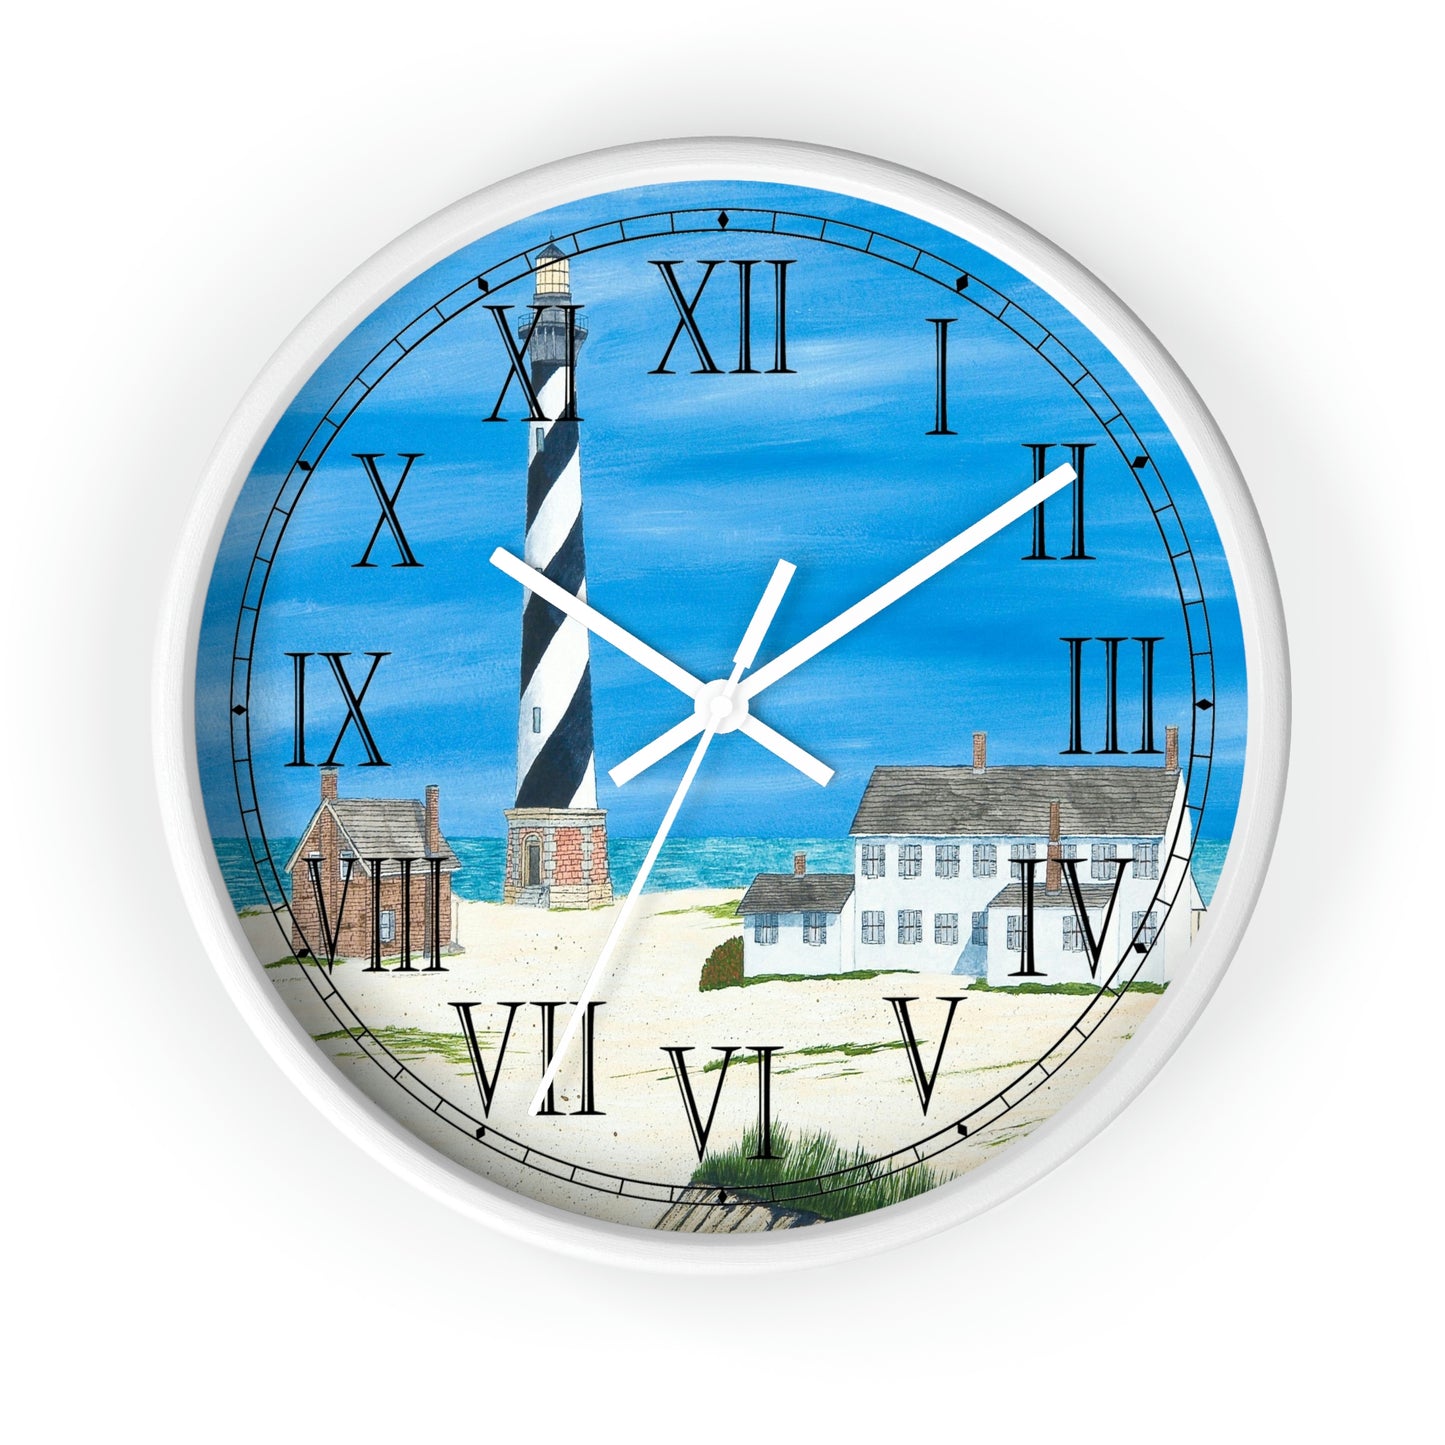 Good Ole Times At Cape Hatteras Roman Numeral Clock